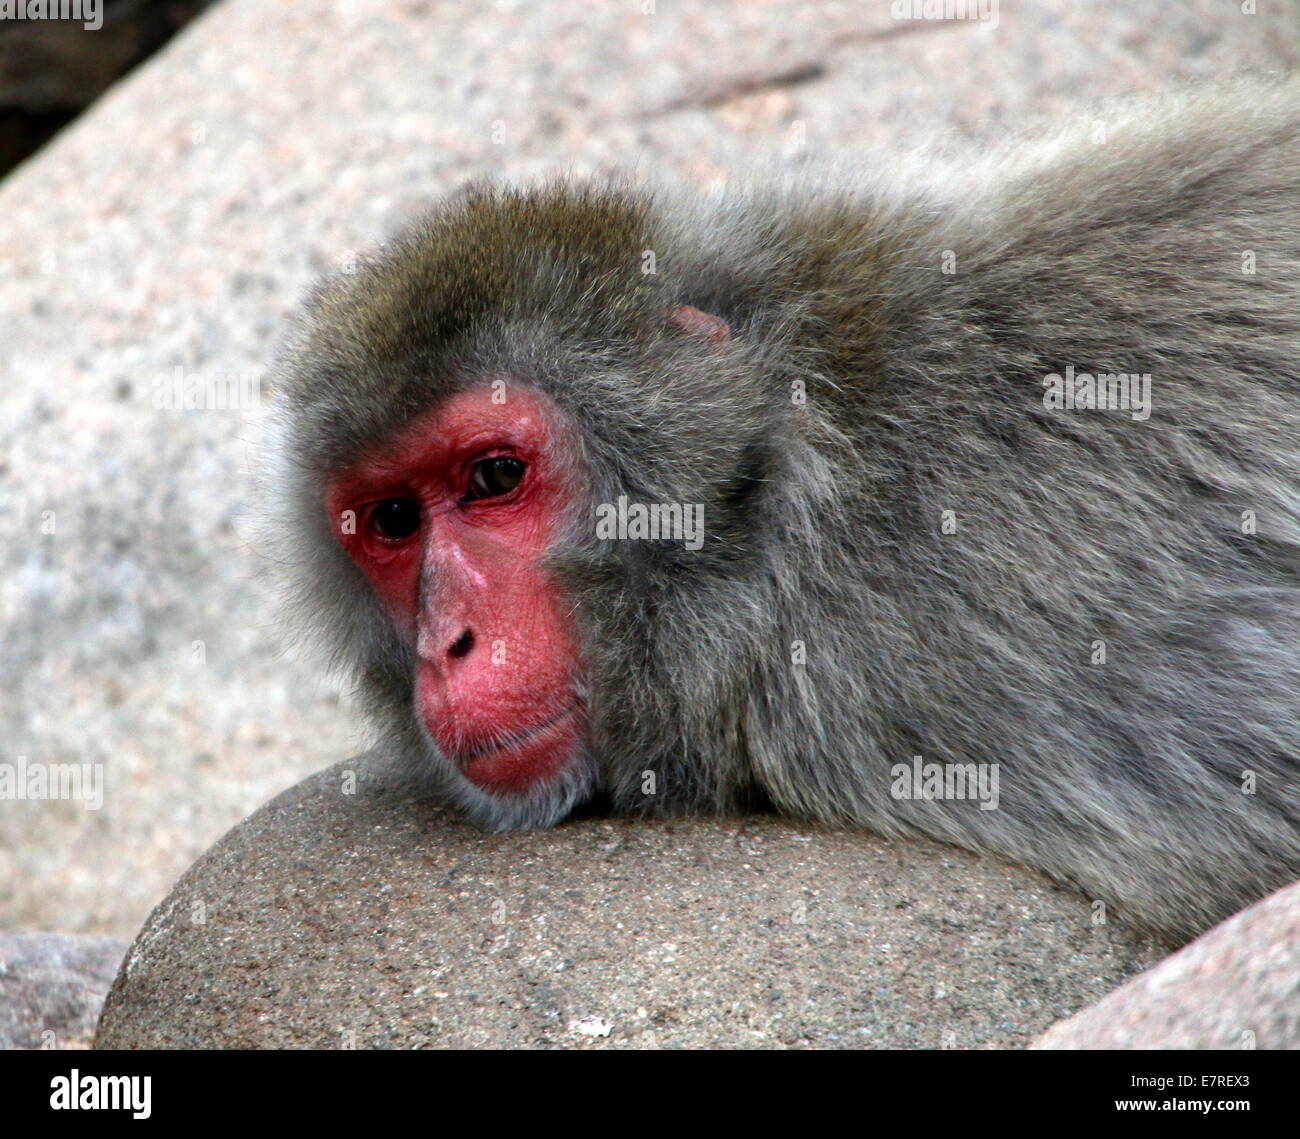 Japanese macaque or Snow monkey (Macaca fuscata) in Artis Zoo, Amsterdam, The Netherlands Stock Photo